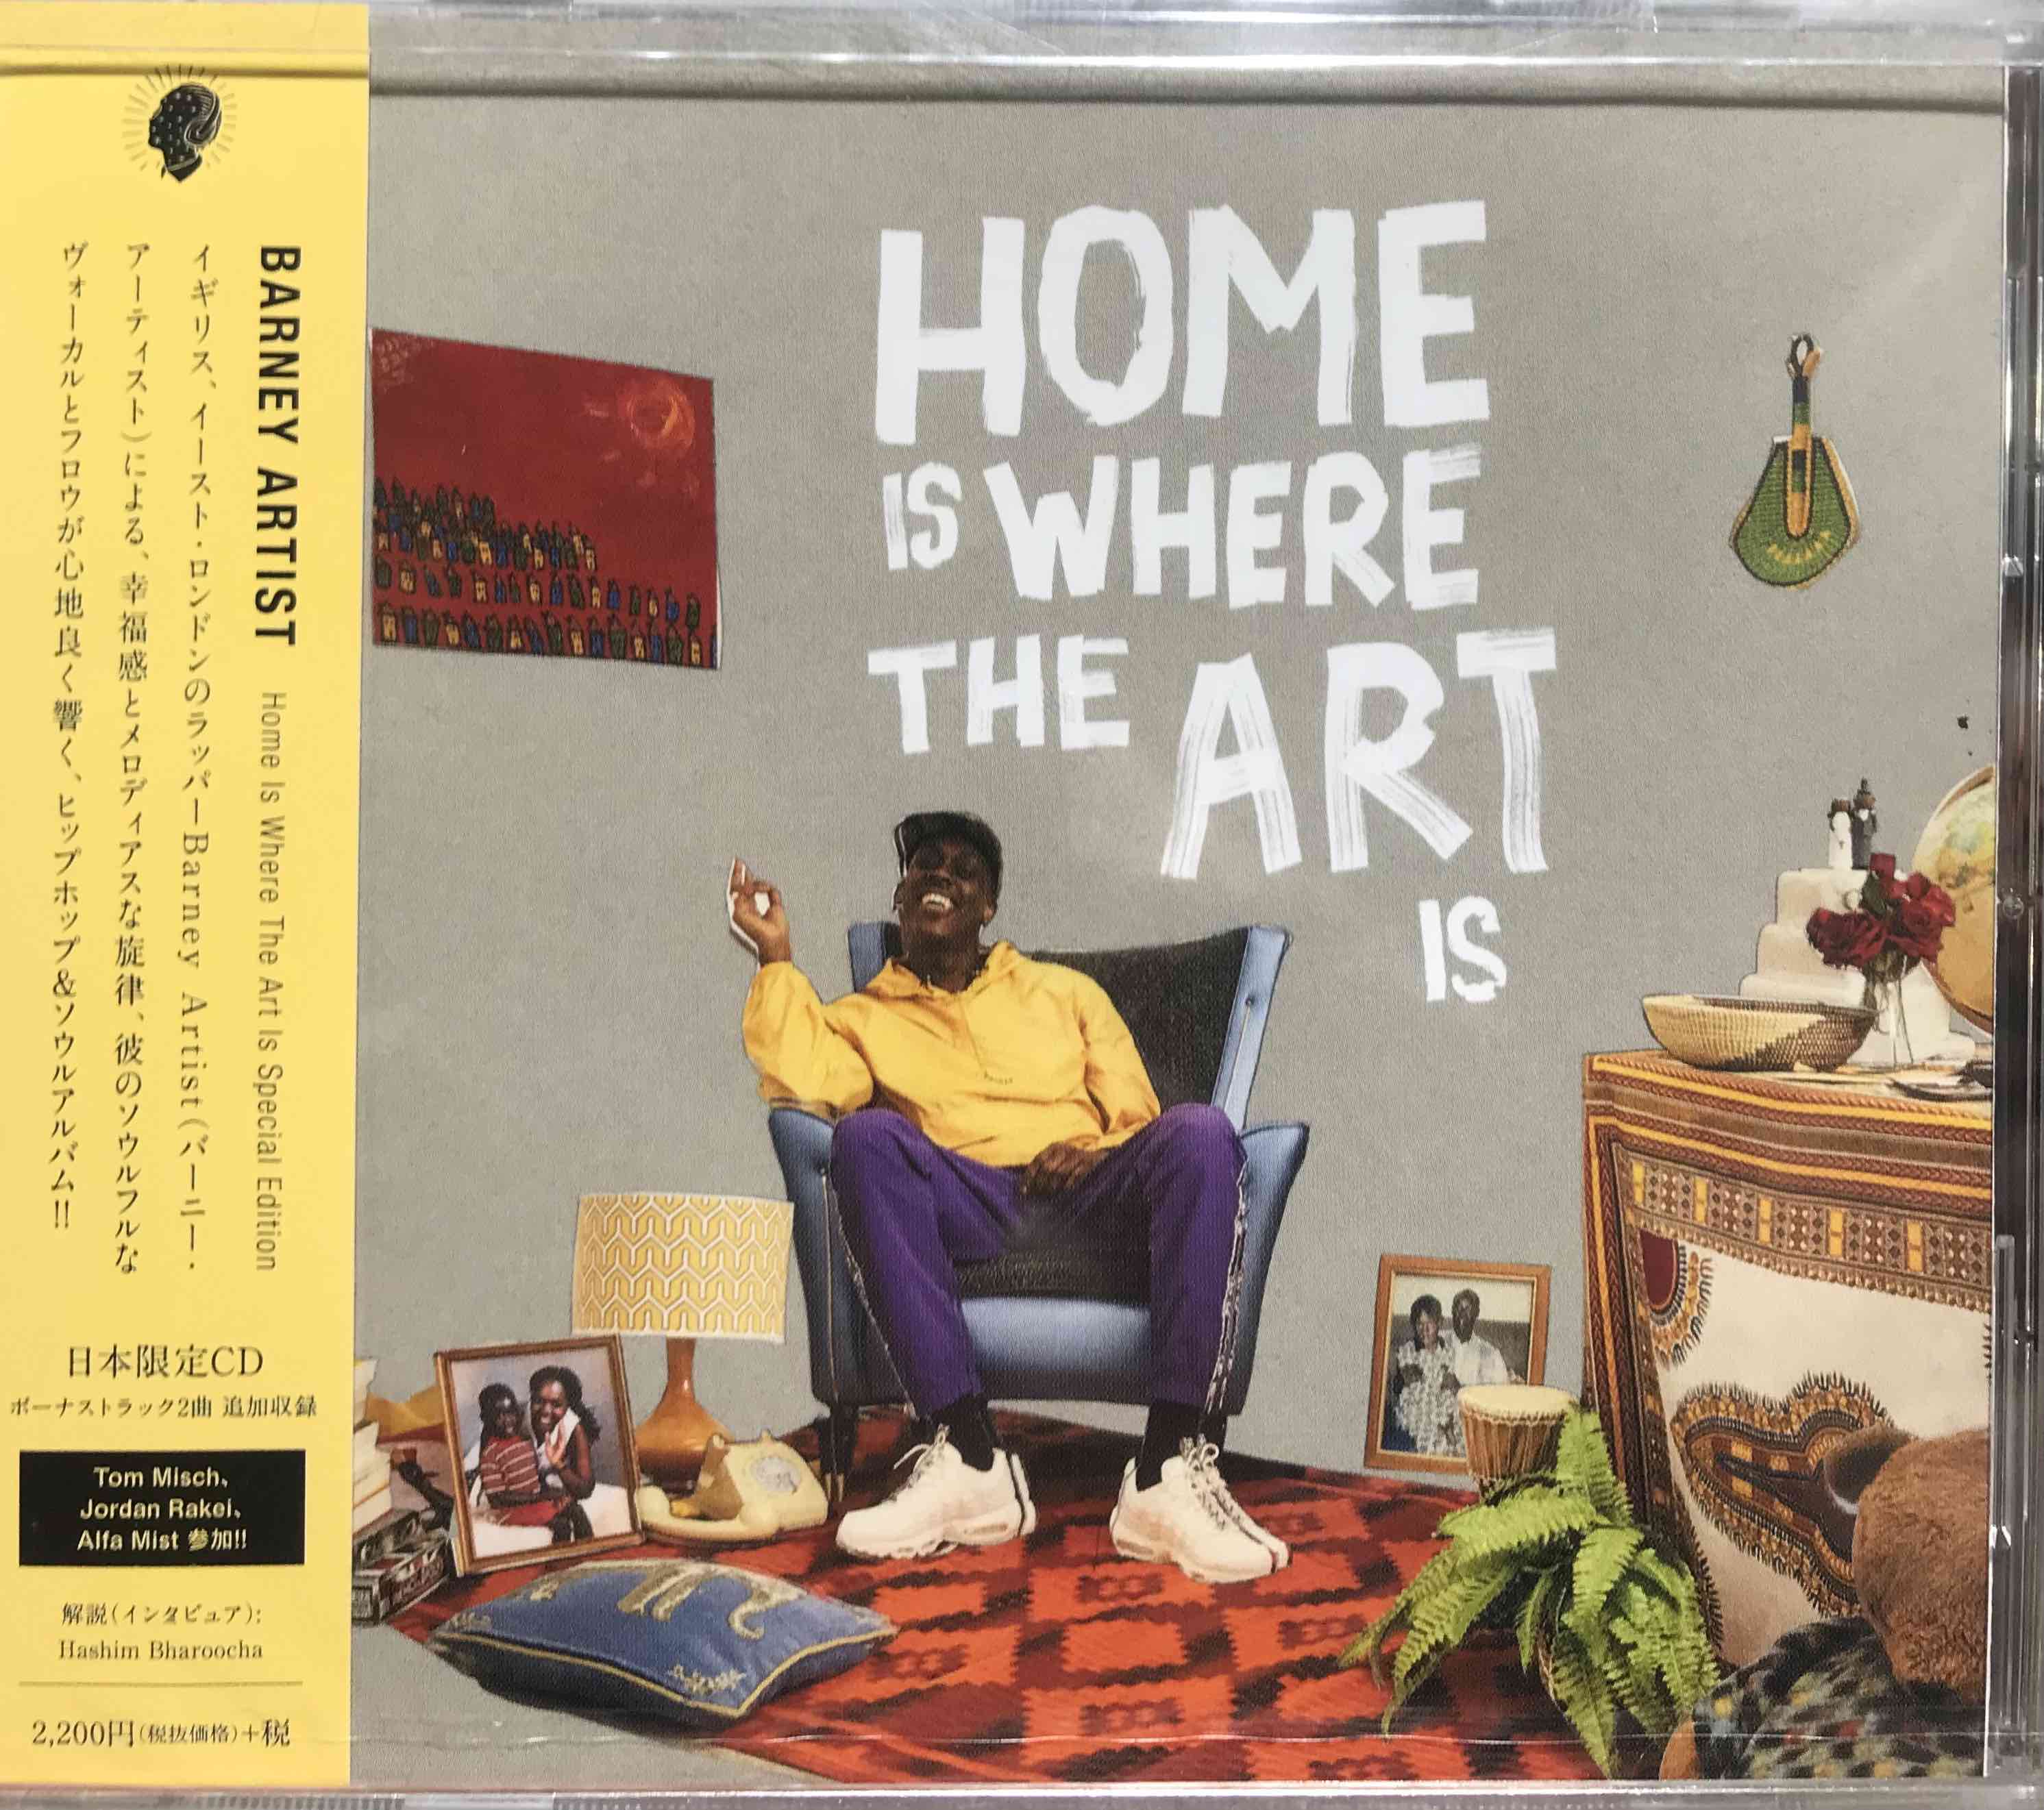 Barney Artist – Home Is Where The Art Is